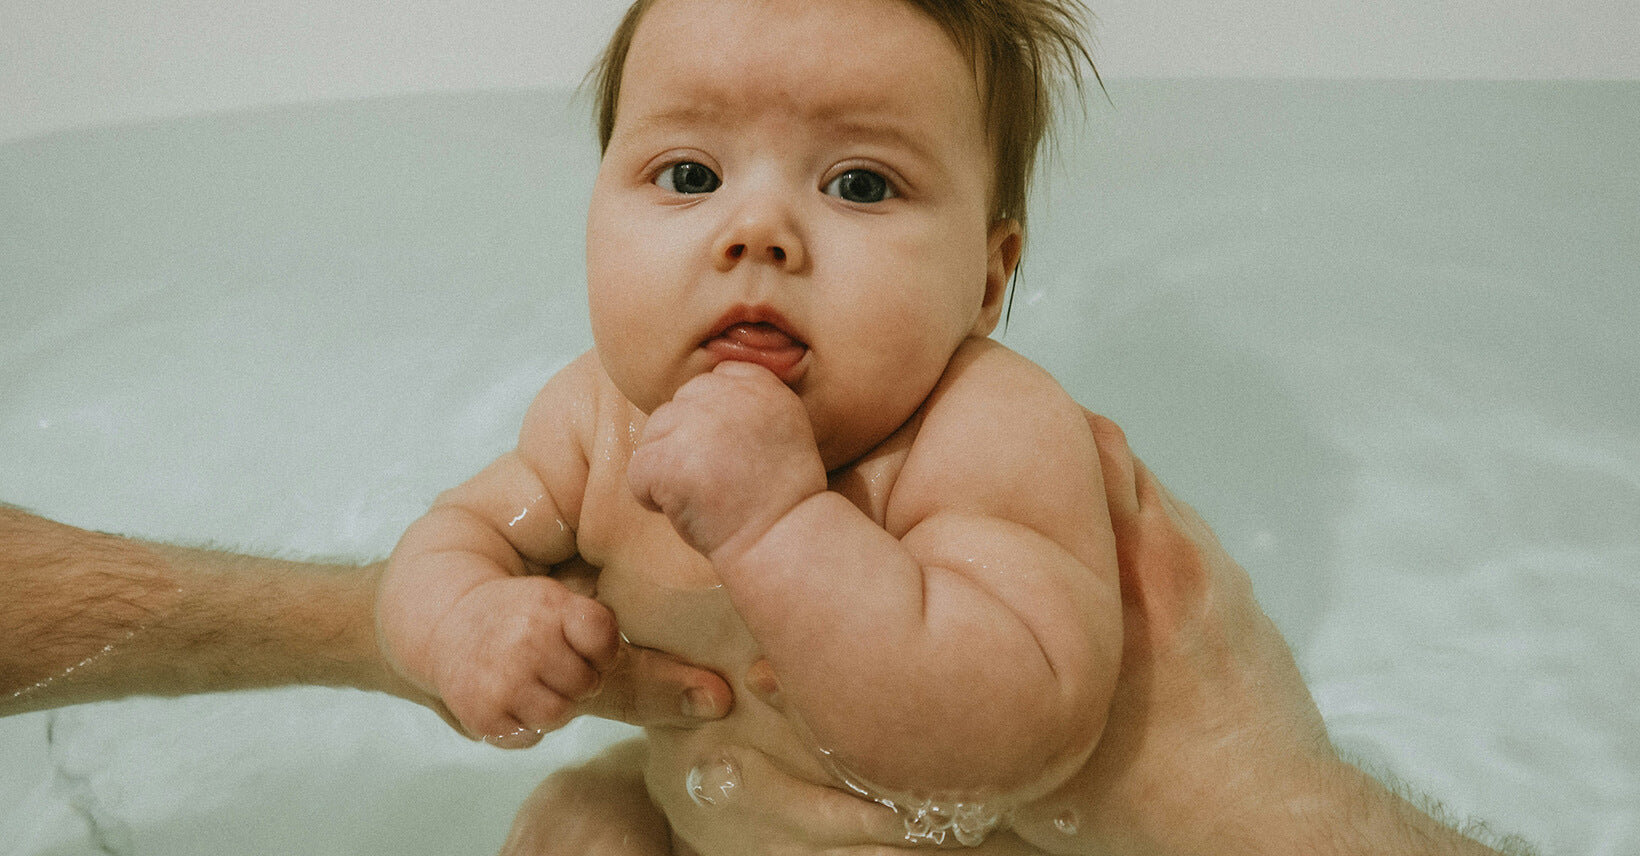 When Can Babies Go Swimming?